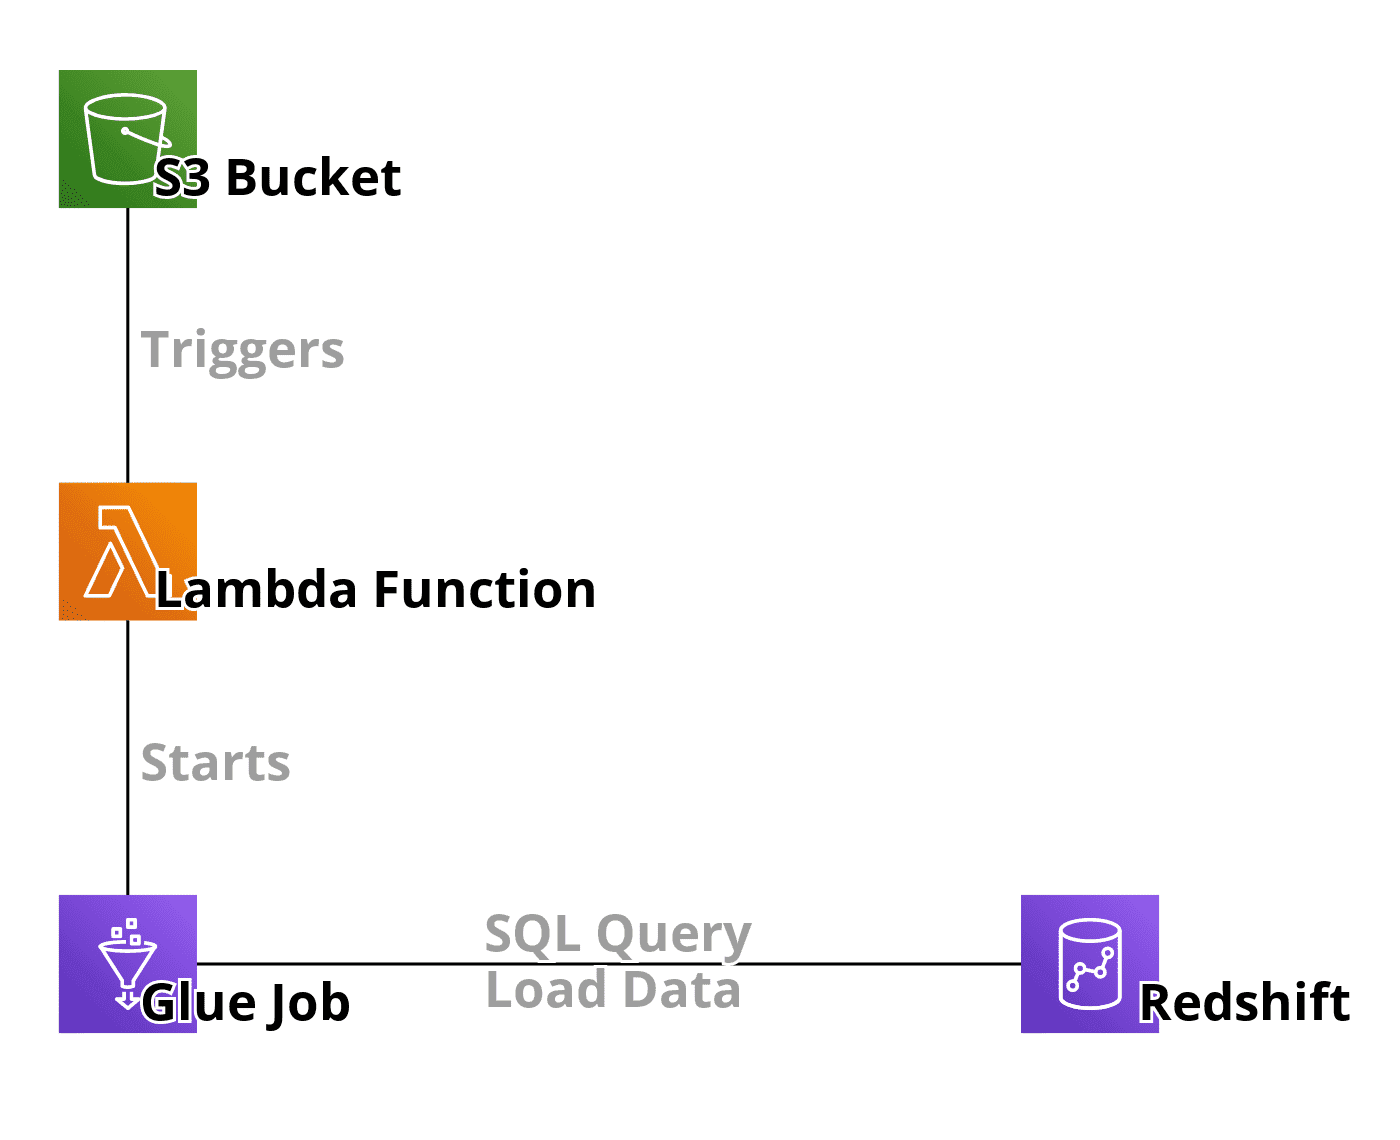 ETL Pipeline to load data from S3 to Redshift